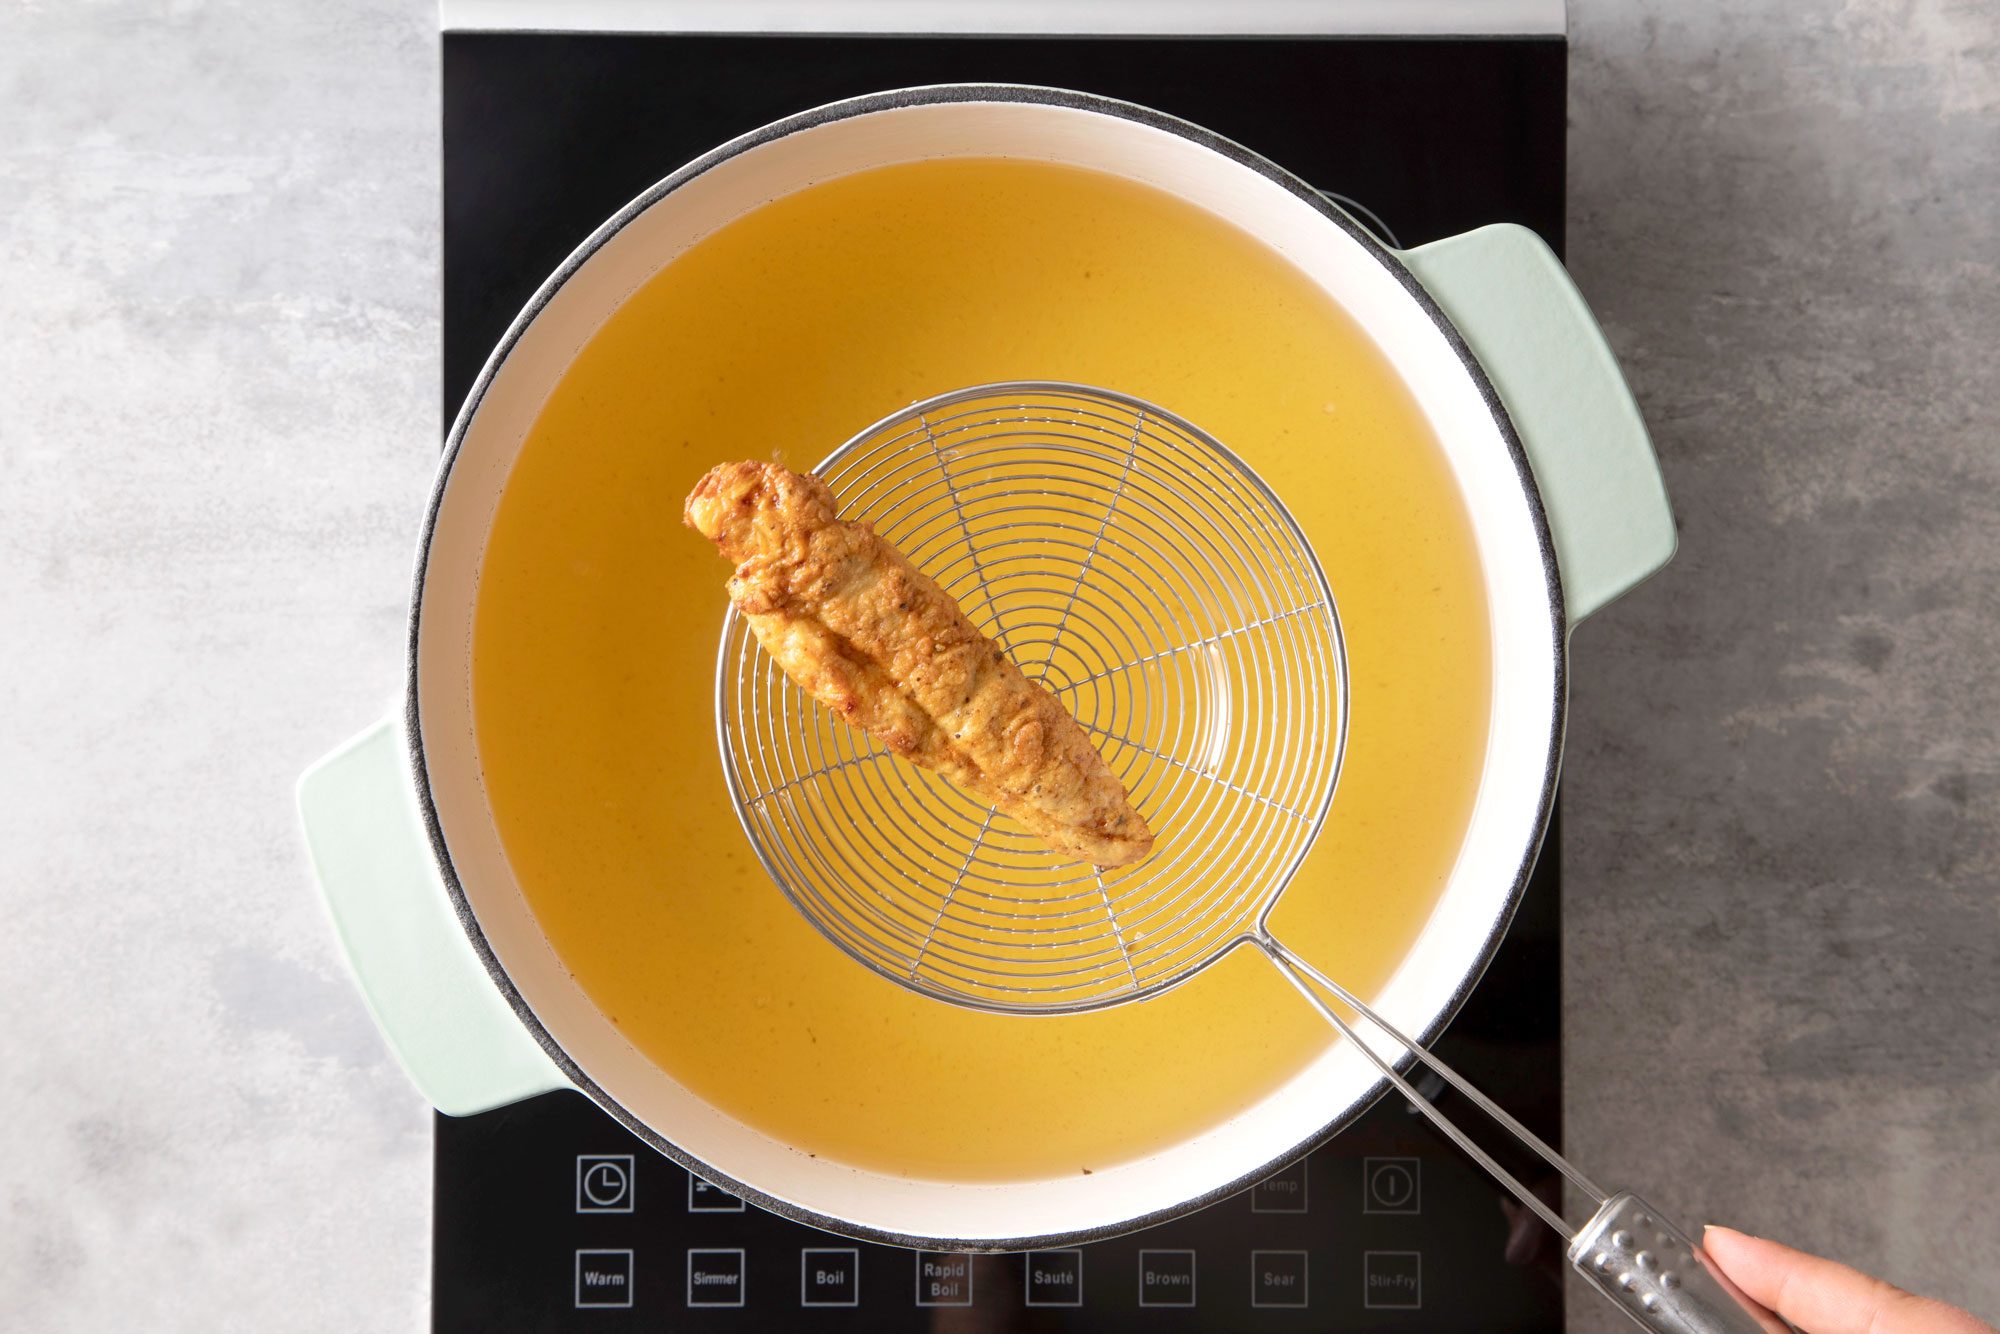 Frying Chicken Tenders in Hot Boiling Oil in a Pan on Induction Cooktop